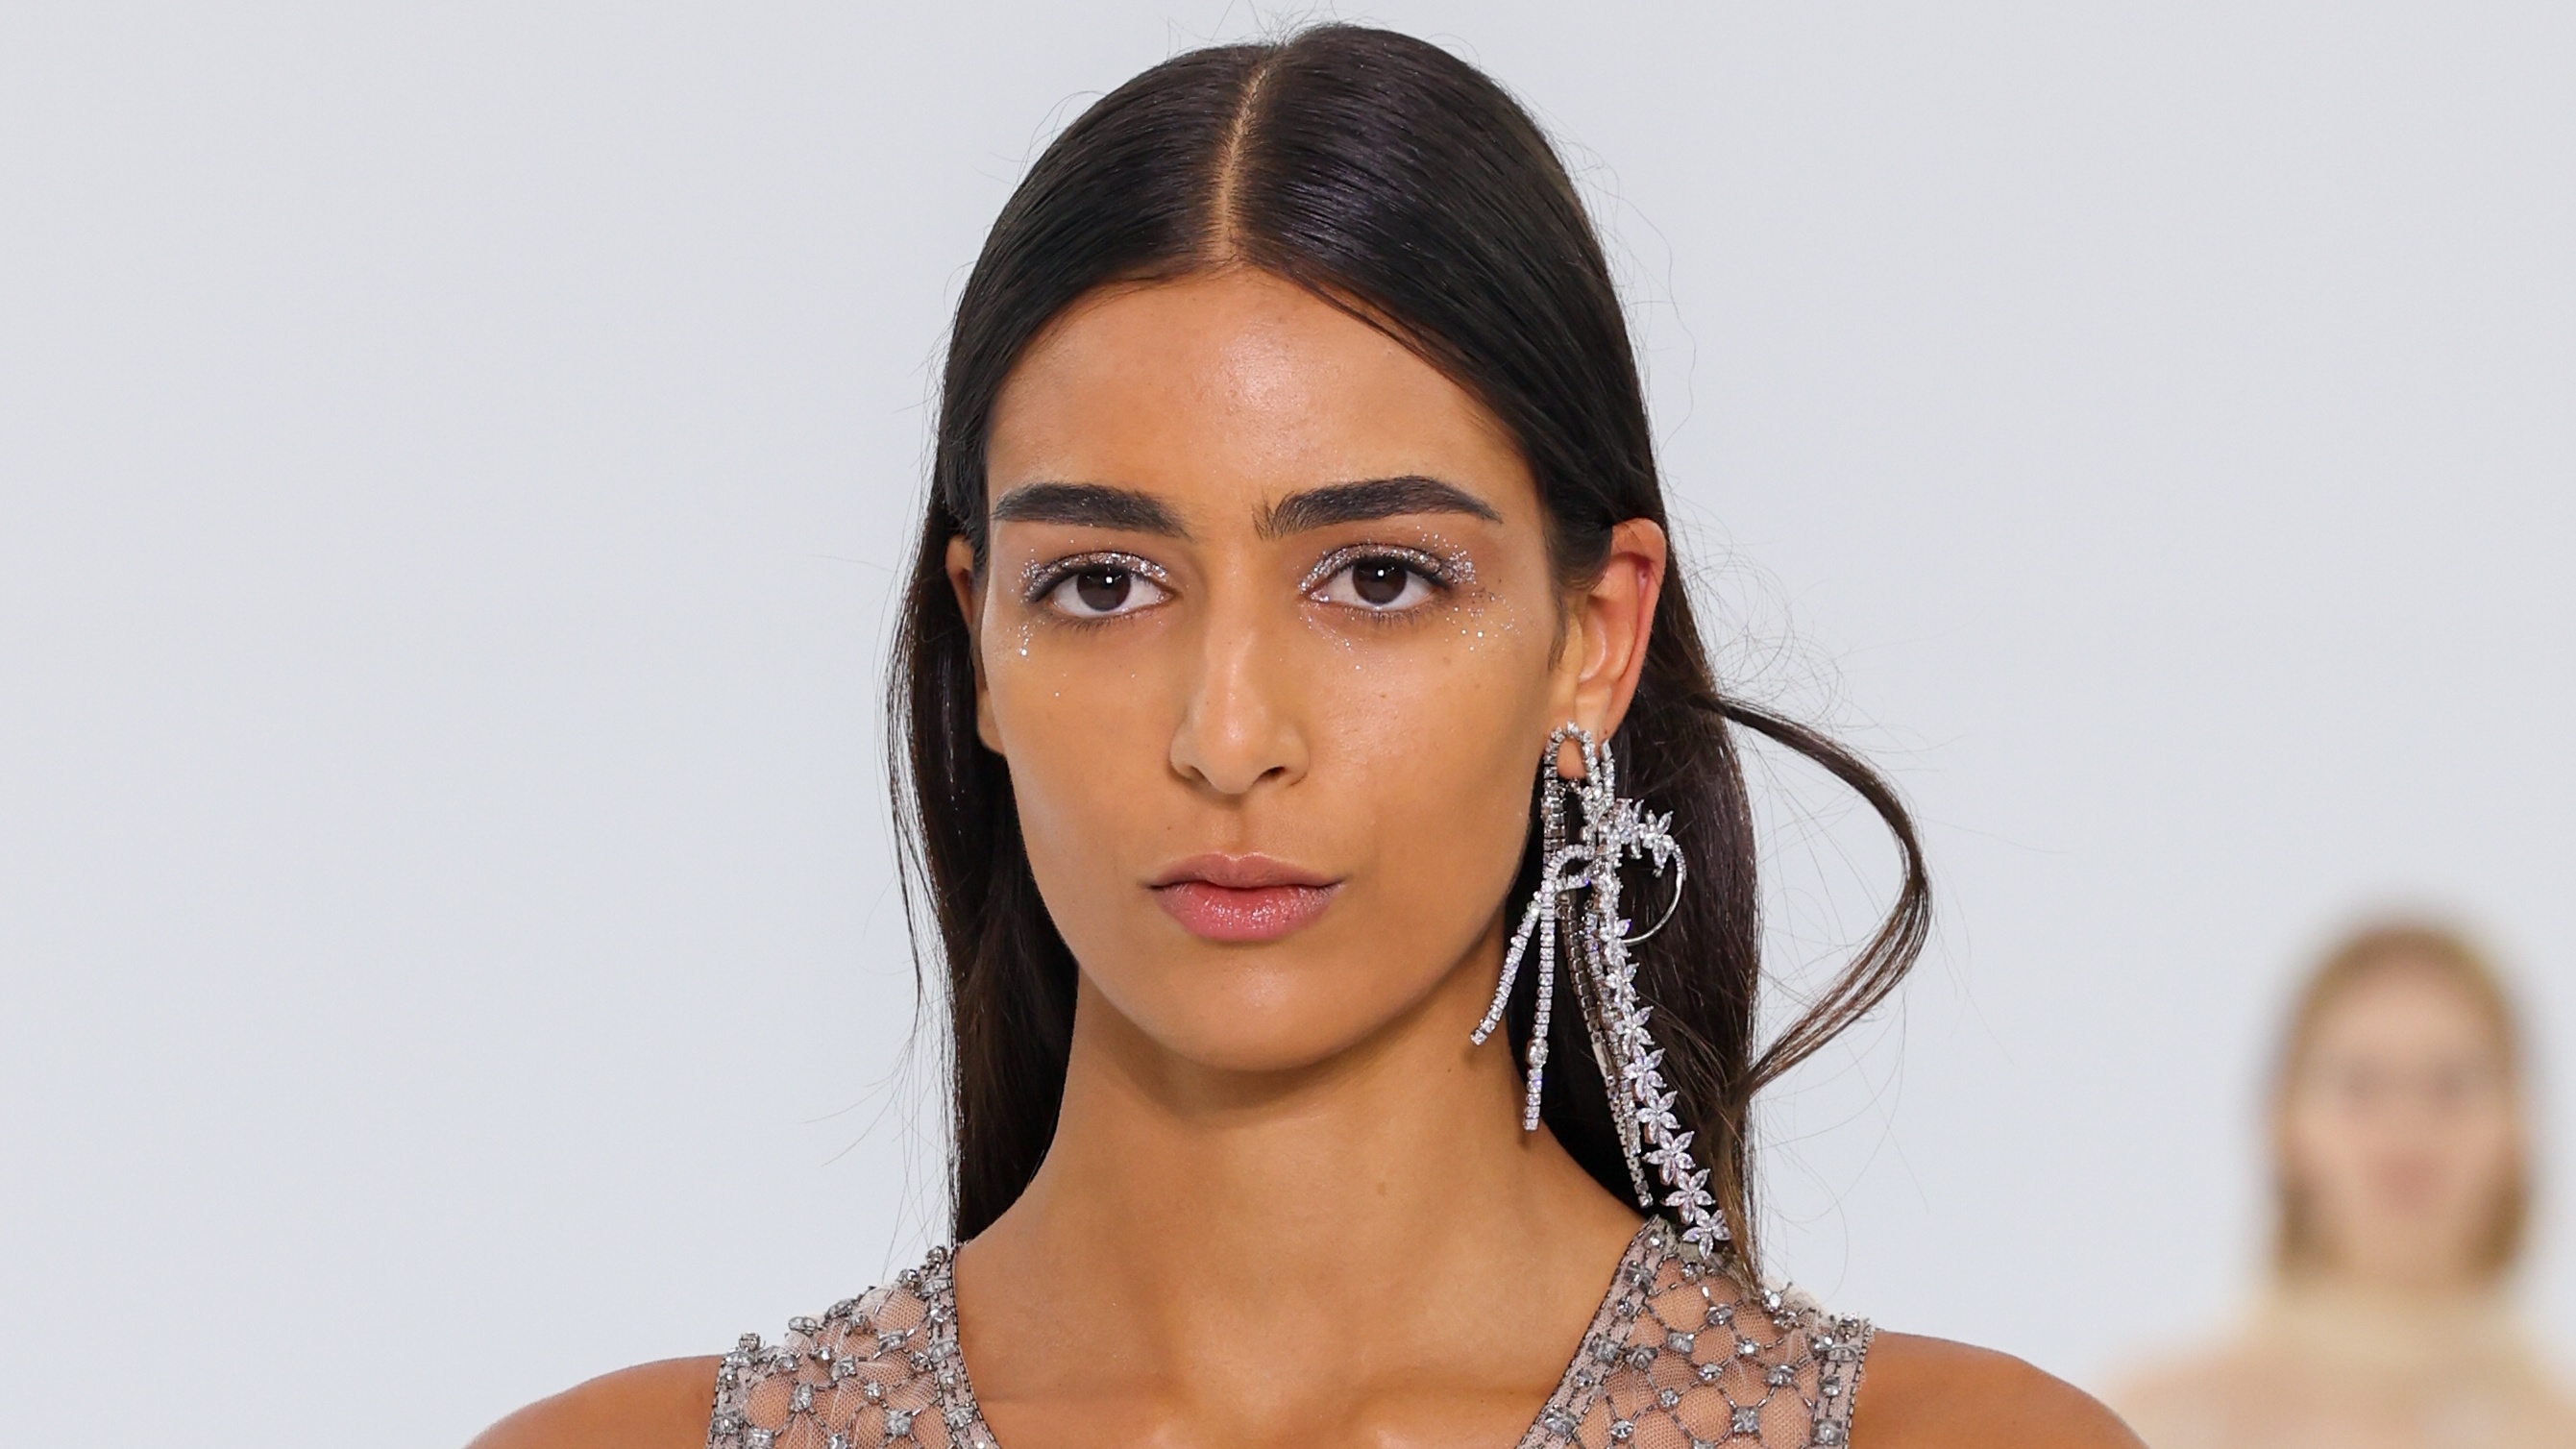 Beauty Details From Fendi’s Haute Couture 2022 Runway